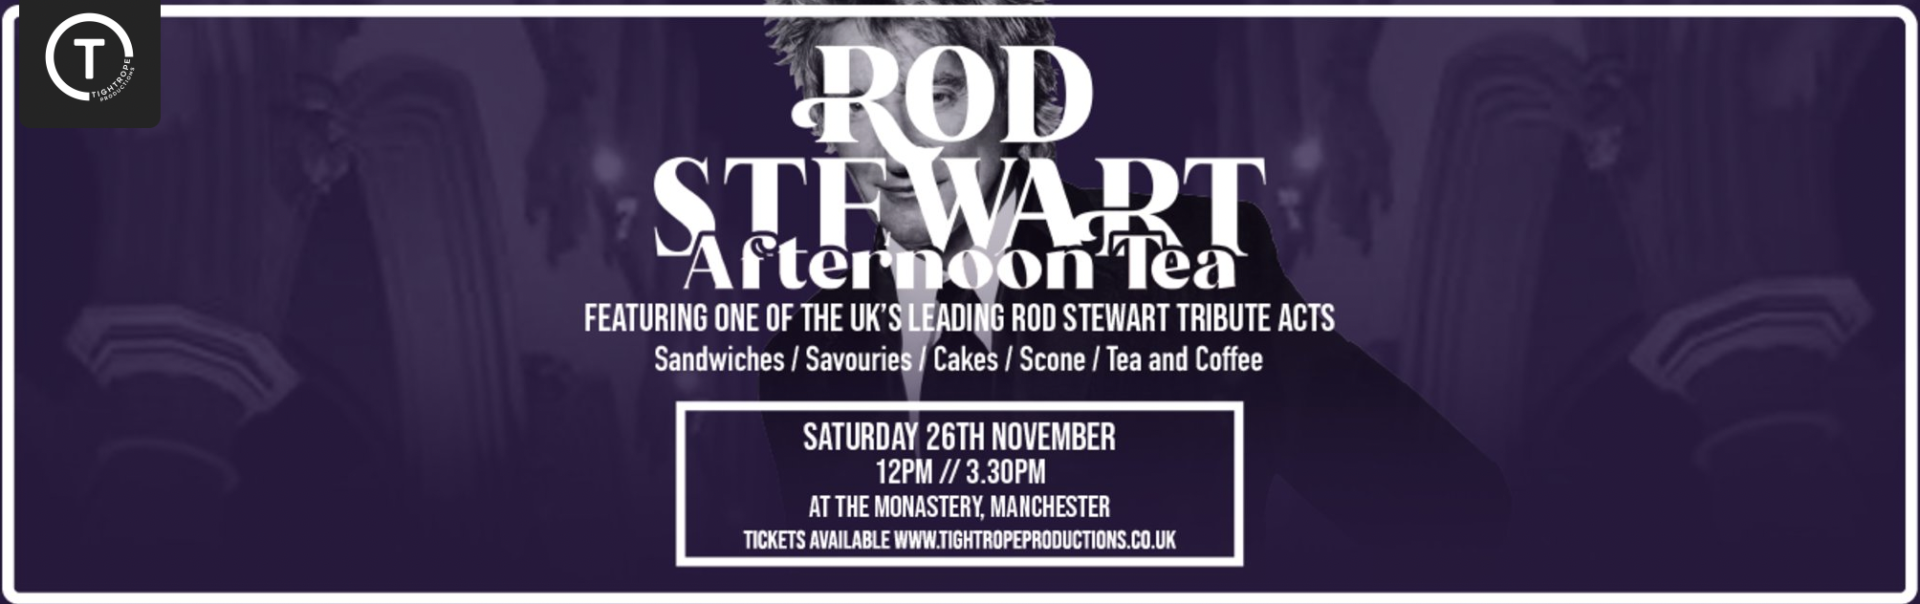 Rod Steward tribute at the Monastery Manchester